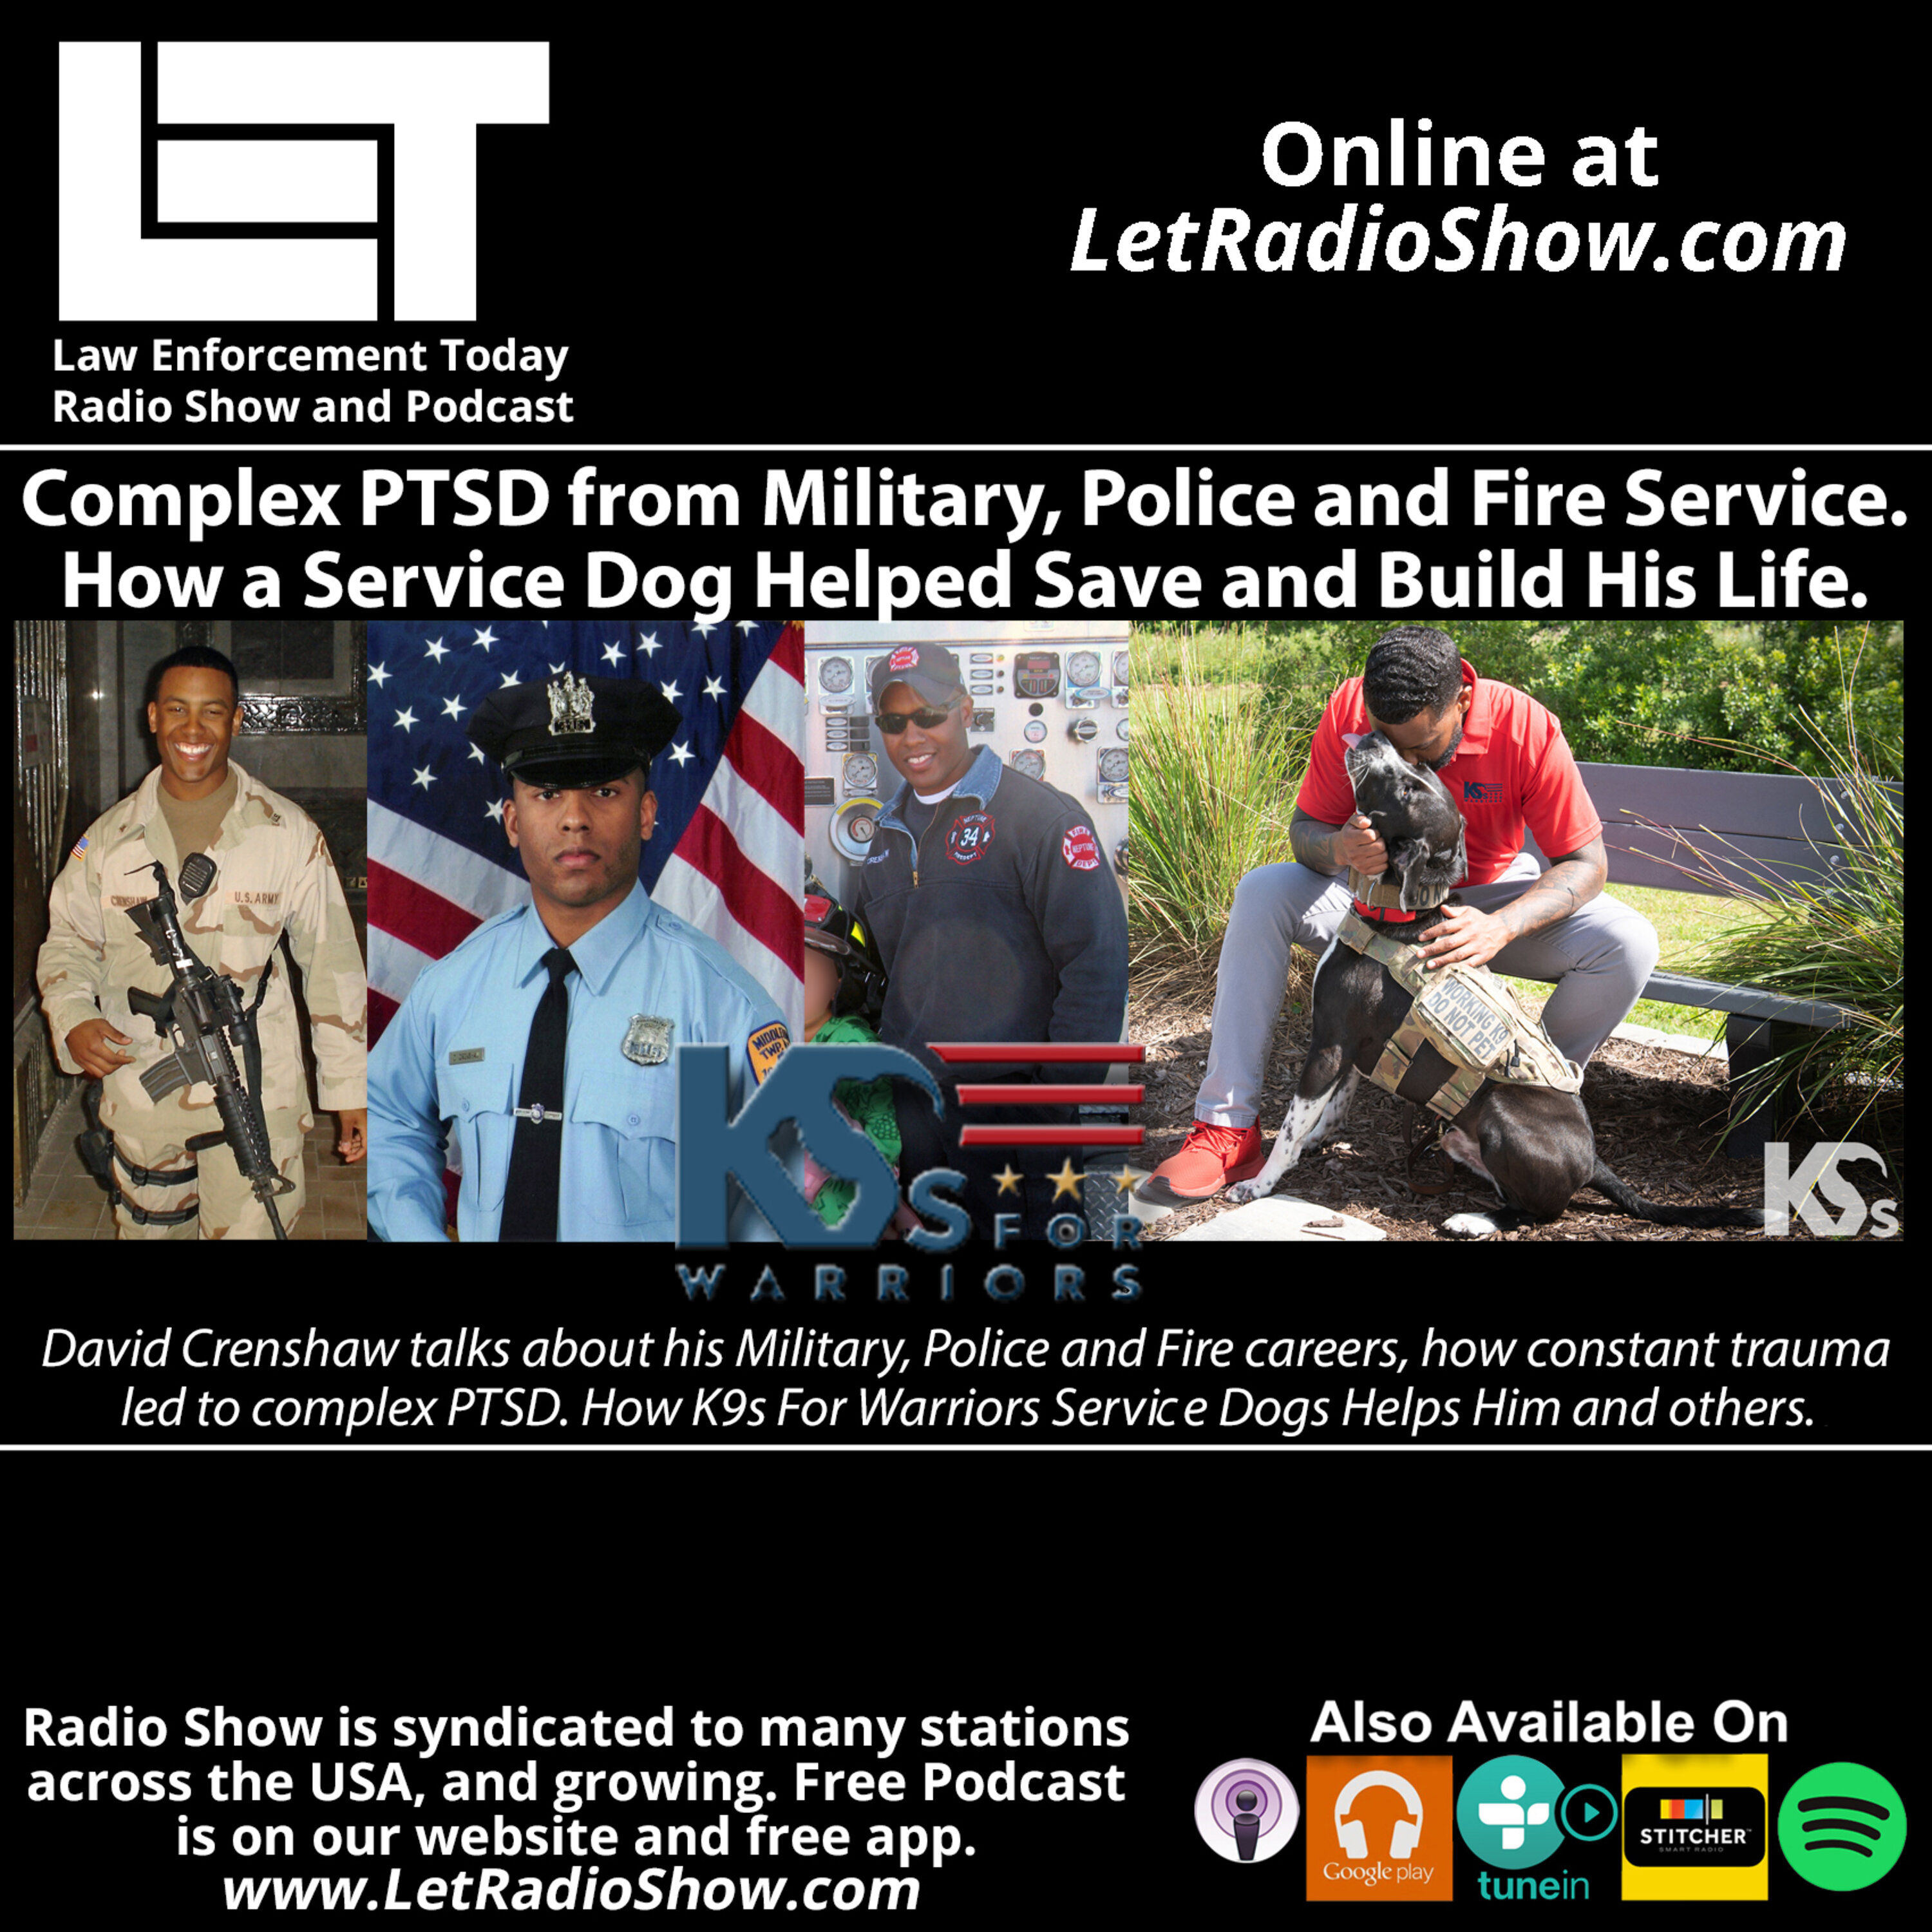 S7E4: PTSD from Military, Police and Fire Service. A Service Dog Helped Save and Build His Life. Image